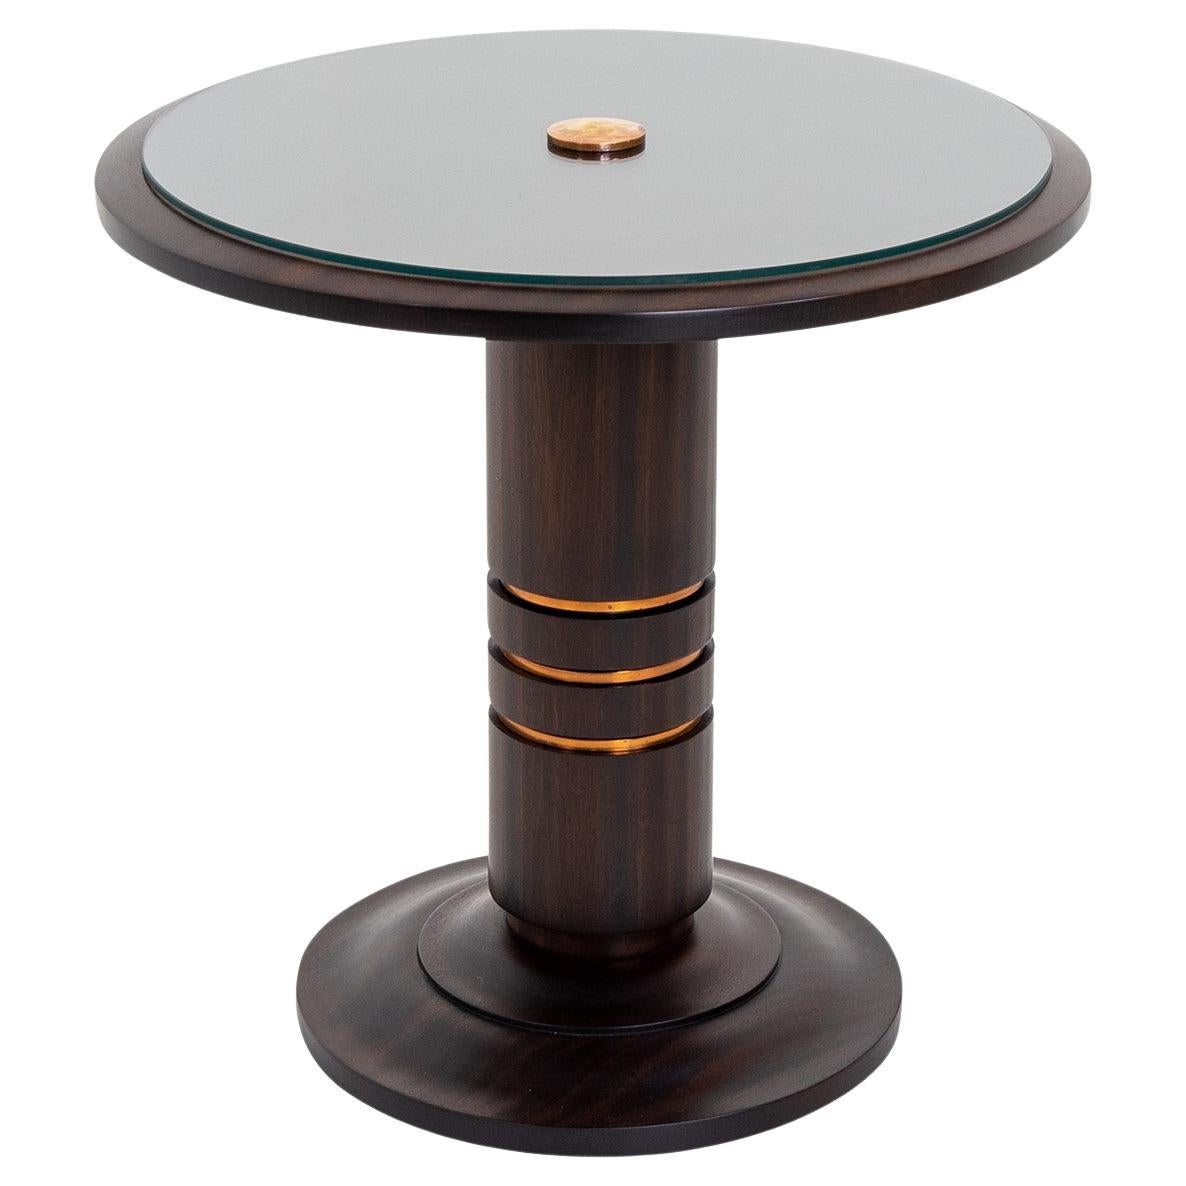 20th Century French Art Deco Small Vintage Round Mahogany Side Table For Sale